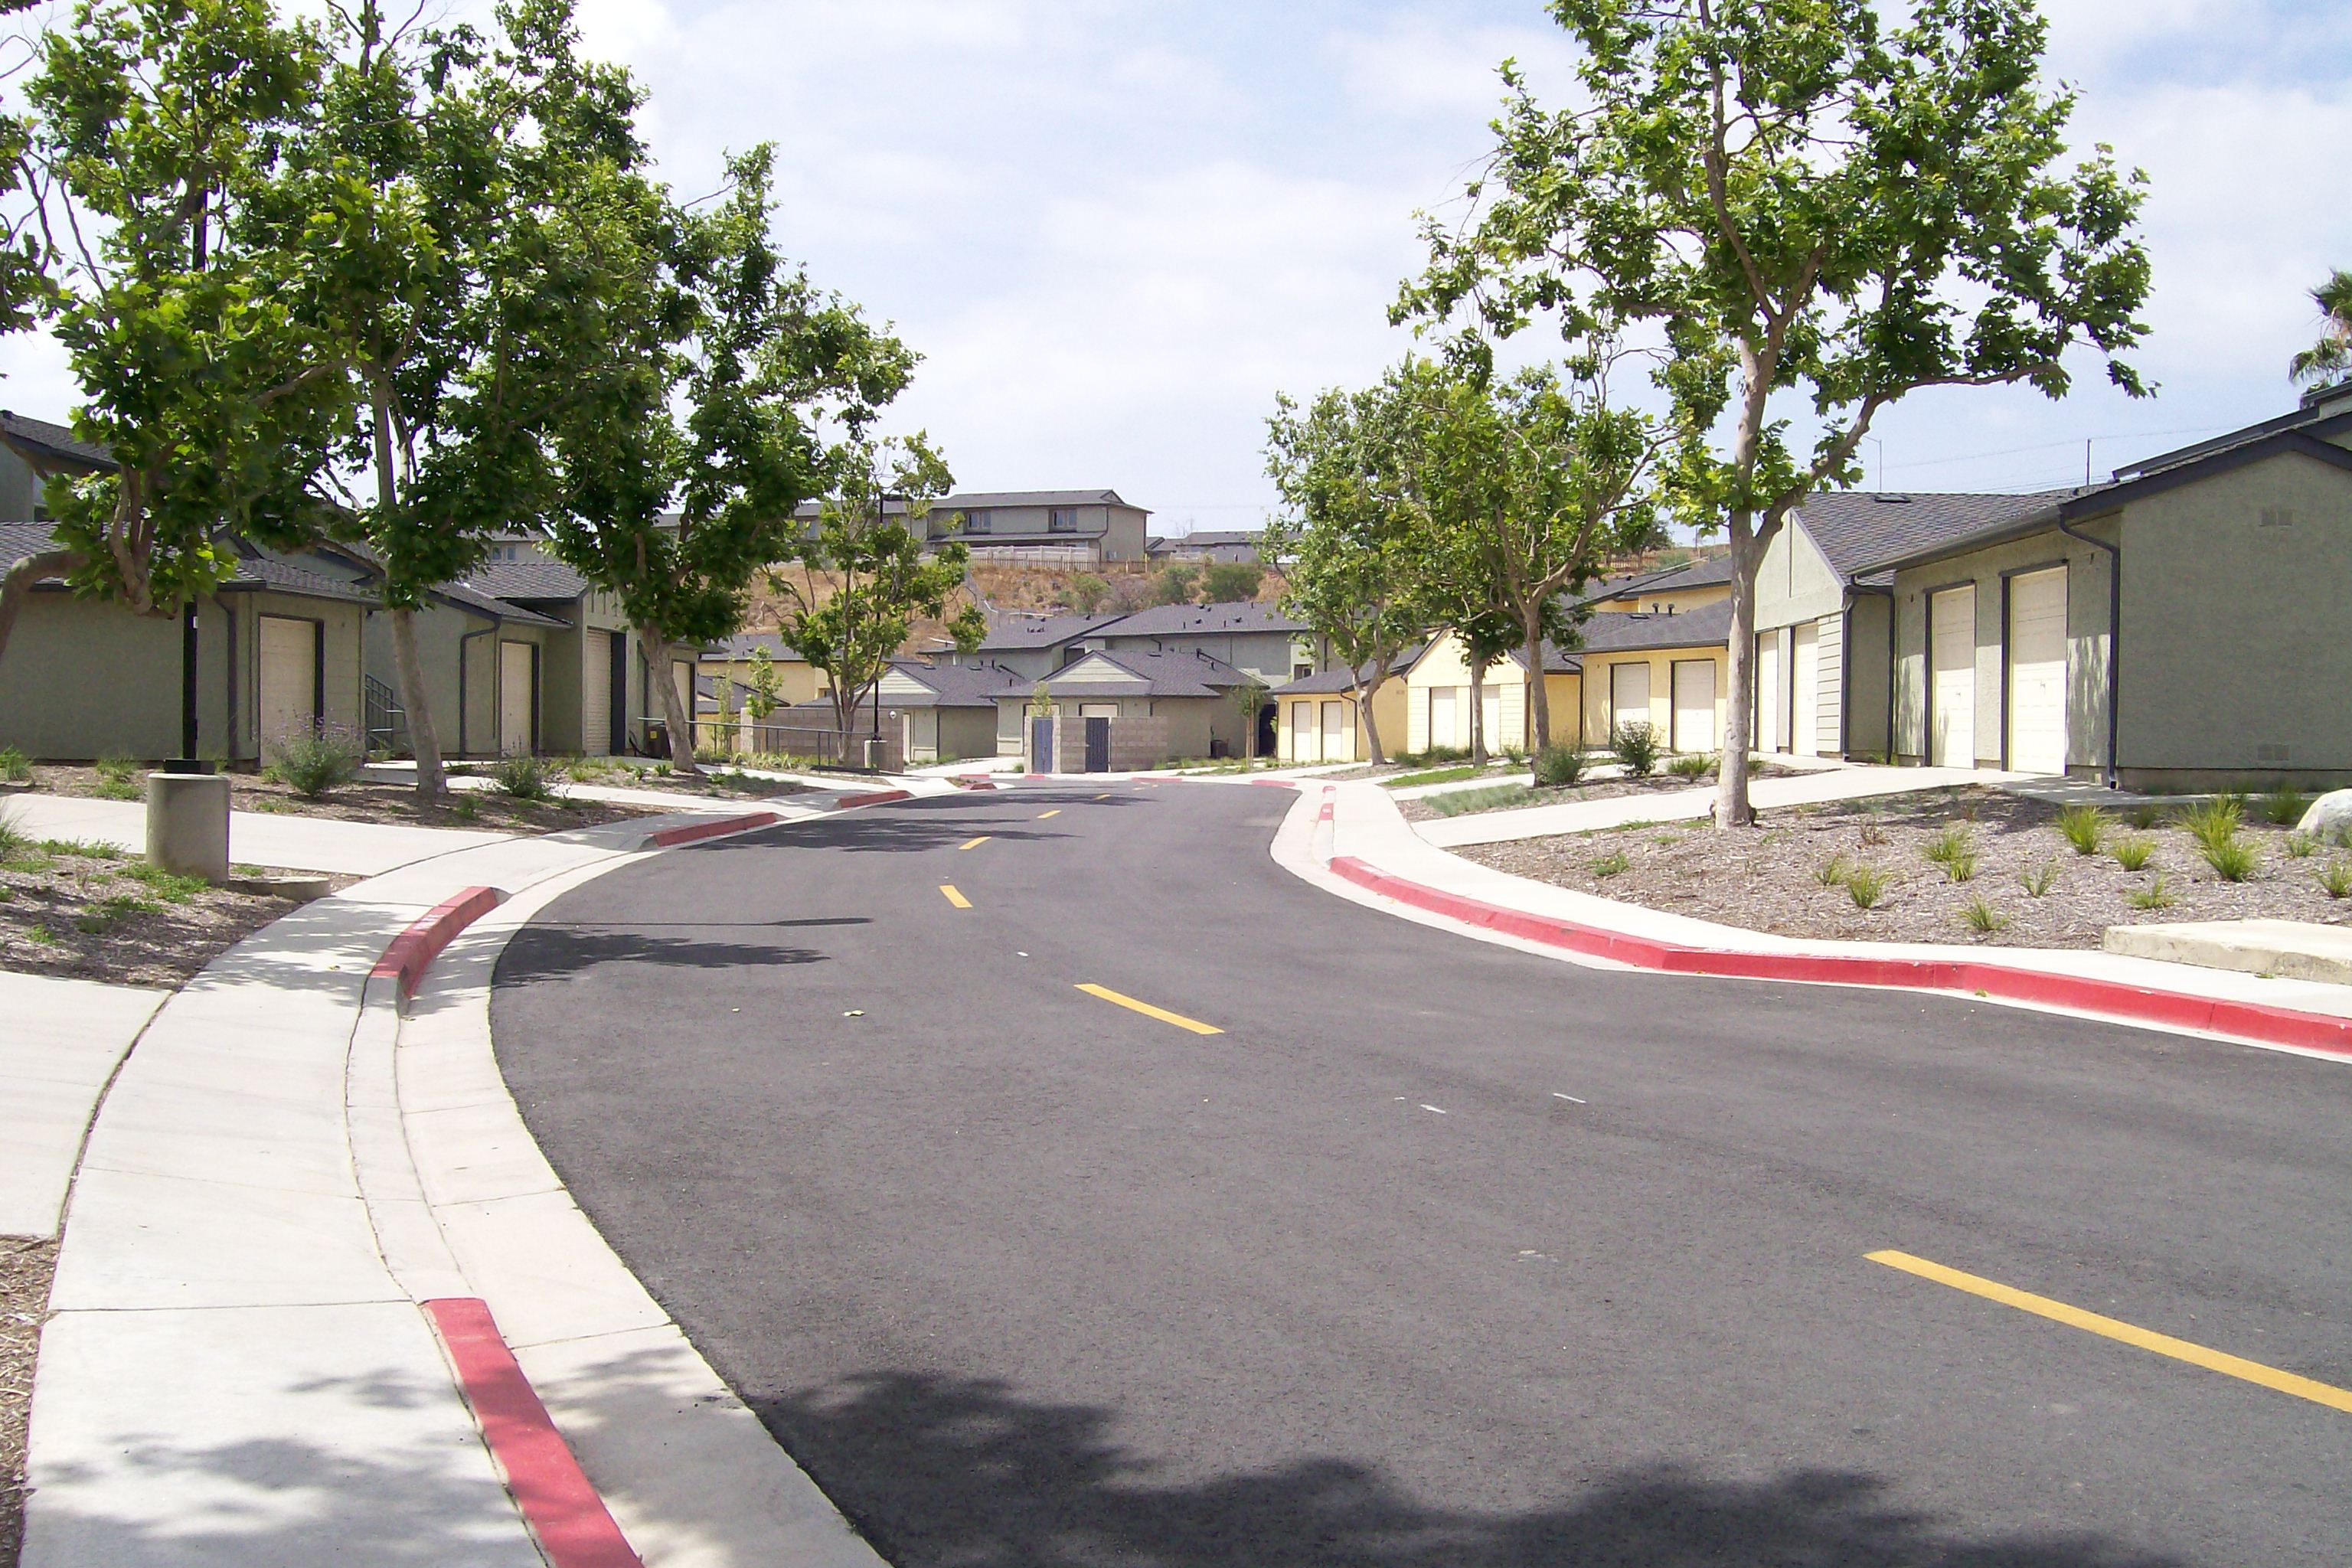 Street view of neighborhood if houses with trees in front of them